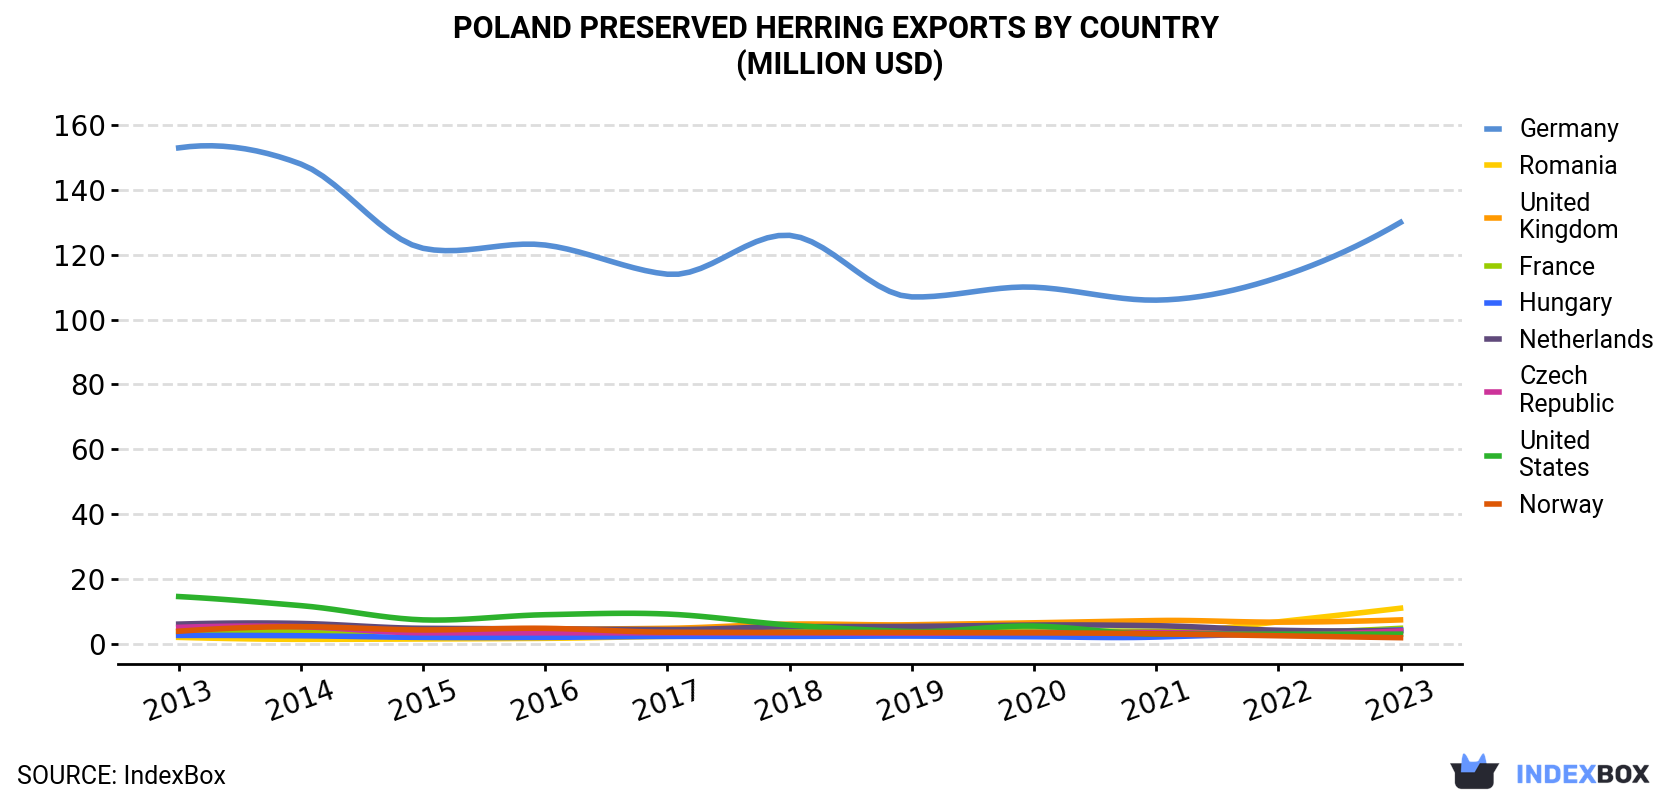 Poland Preserved Herring Exports By Country (Million USD)